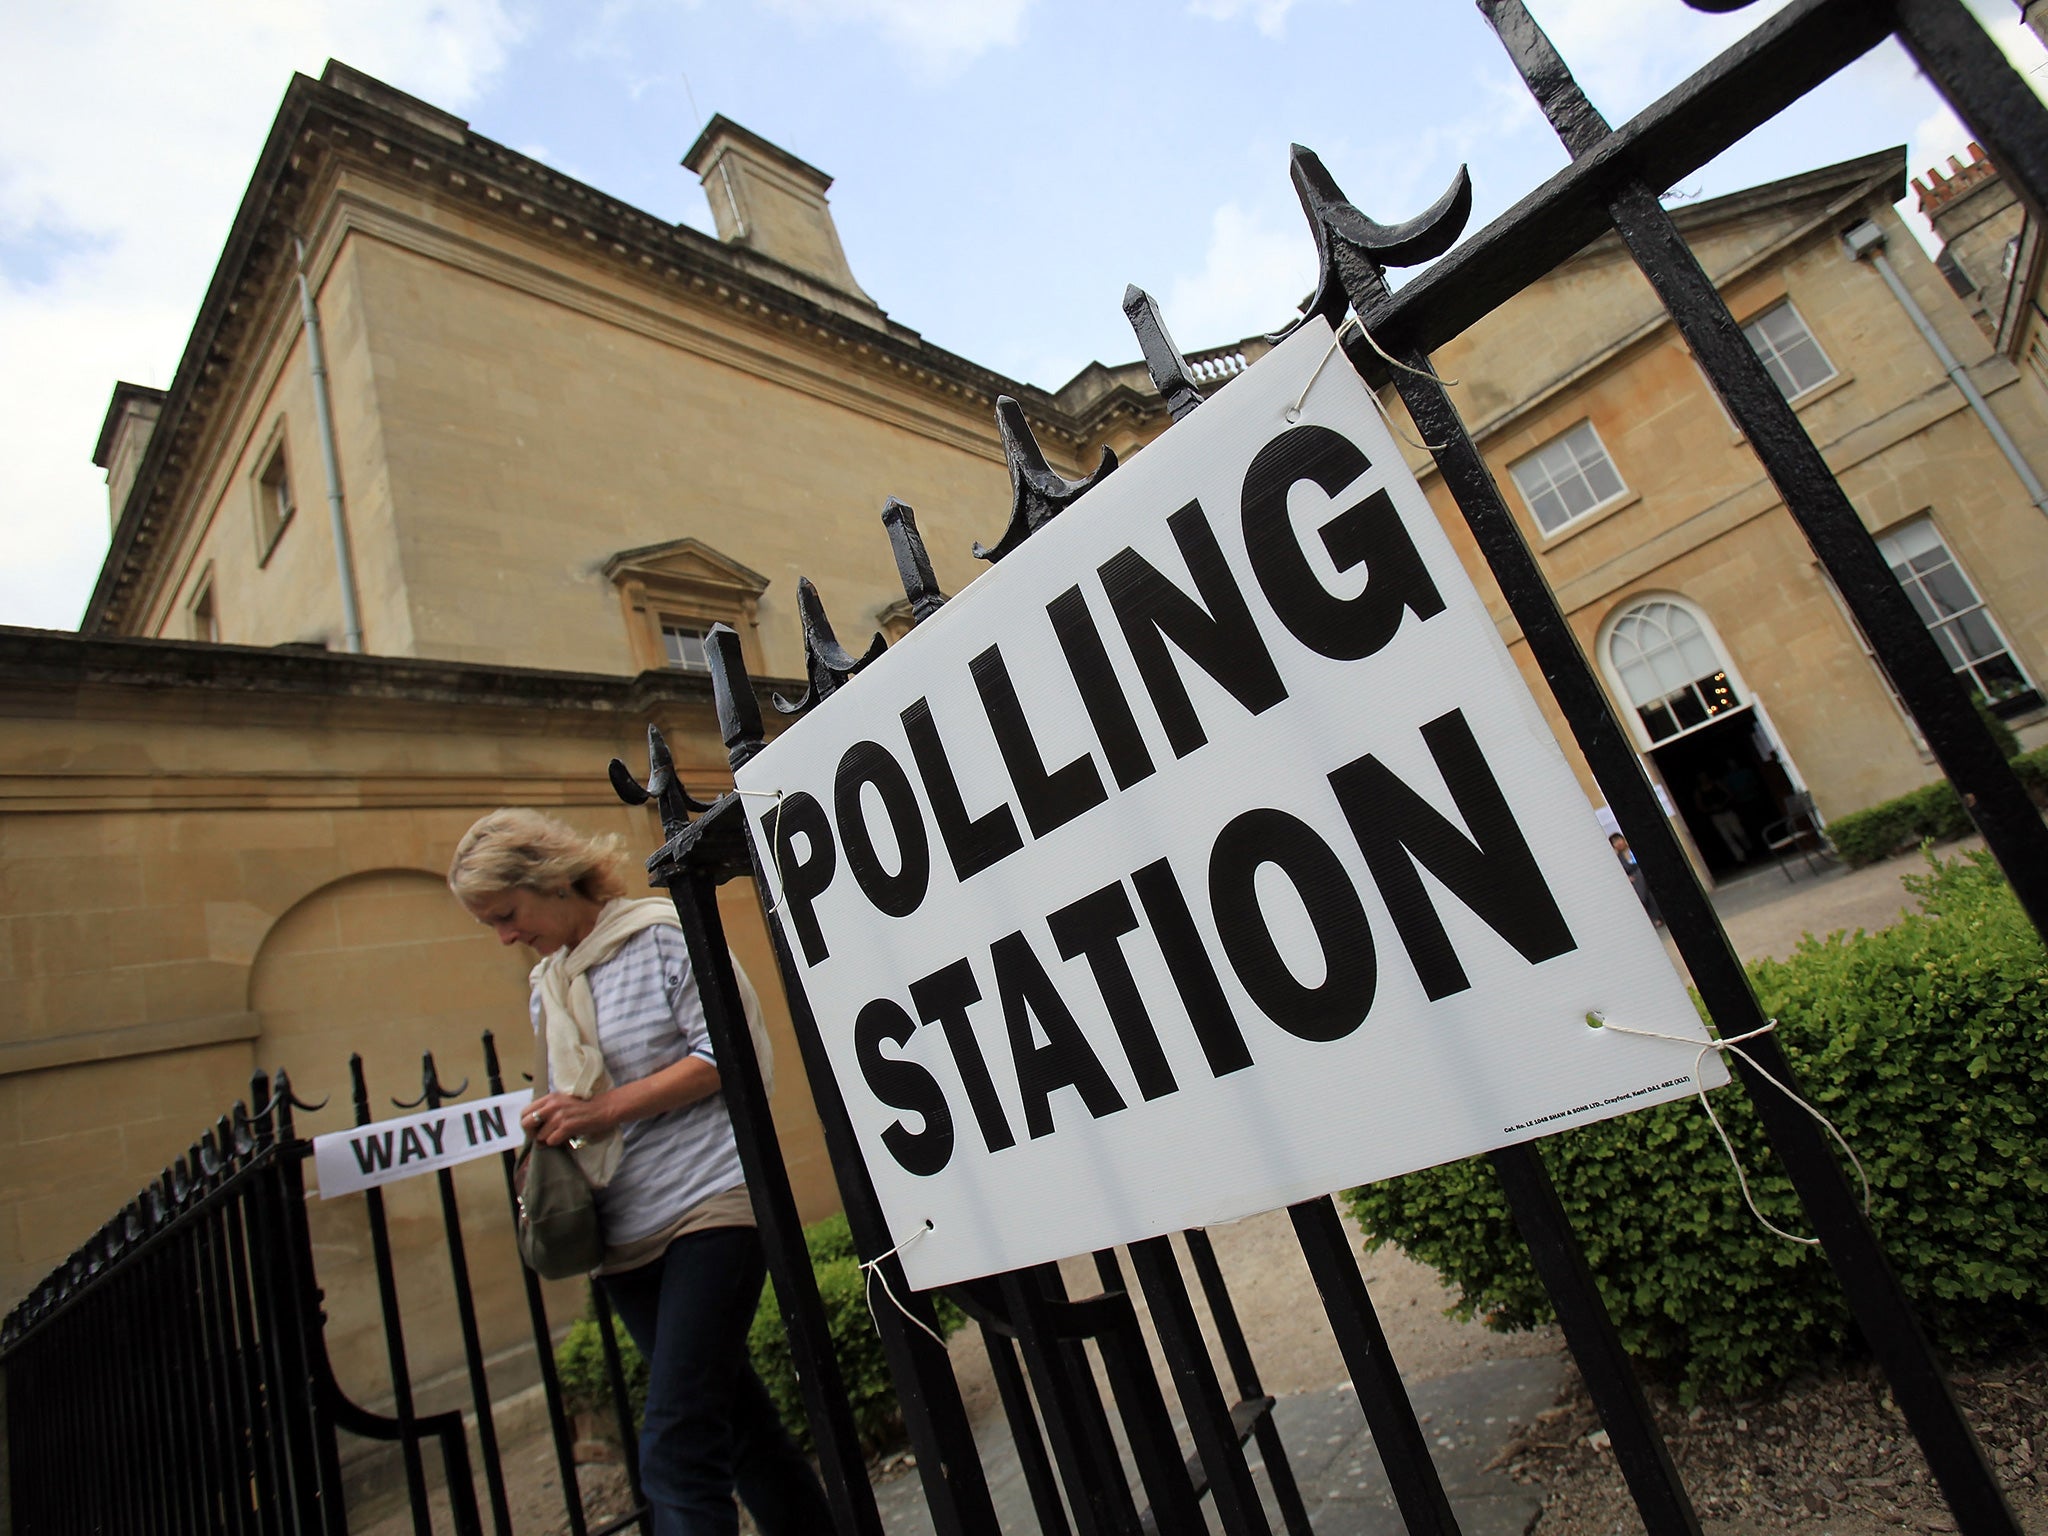 Changes aim to equalise the number of voters in each constituency